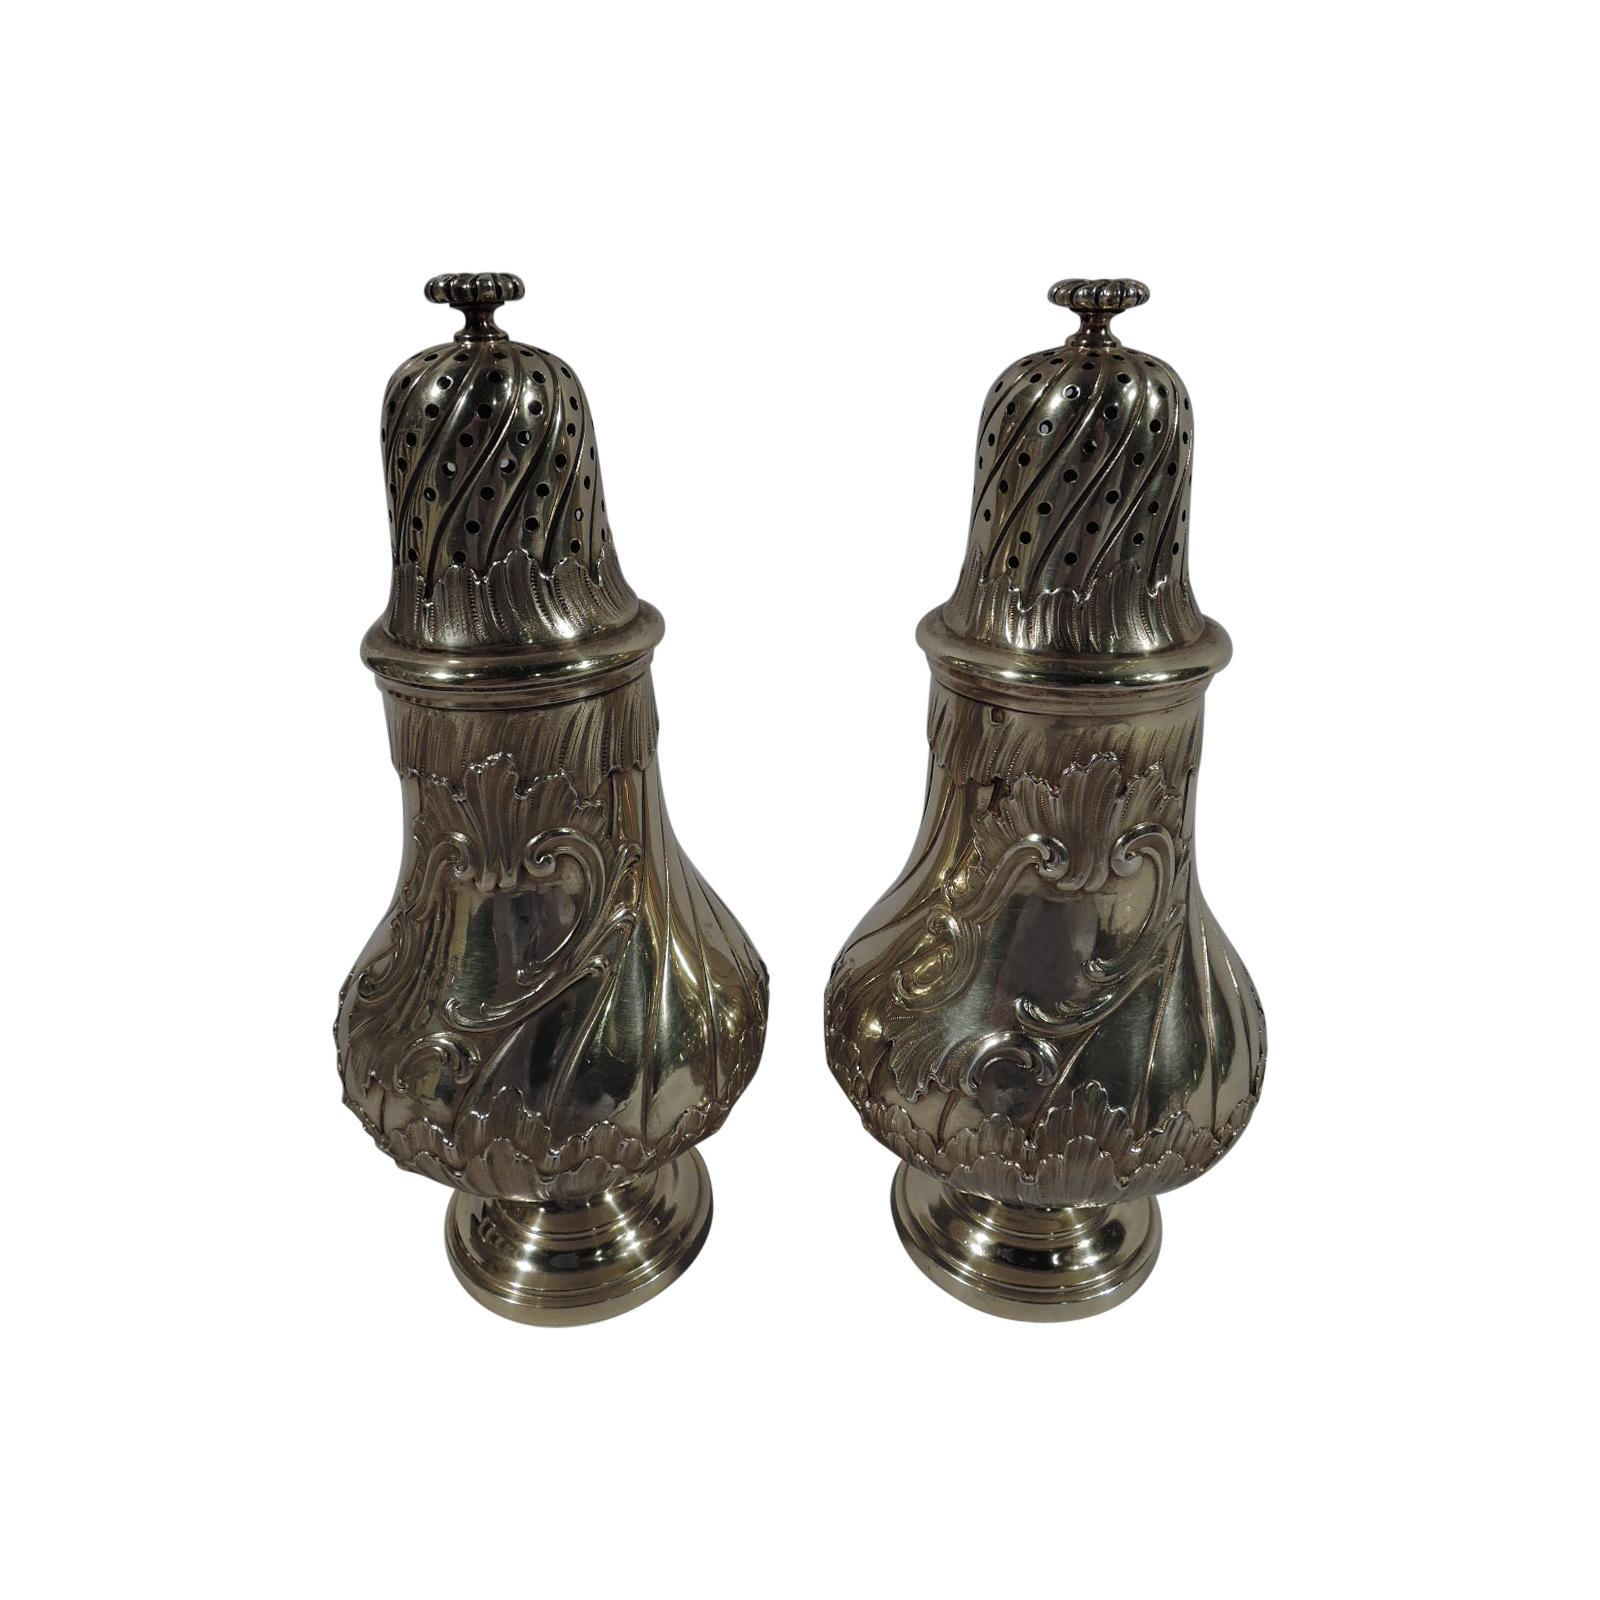 Pair of French Belle Epoque Silver Gilt Sugar Casters by Odiot